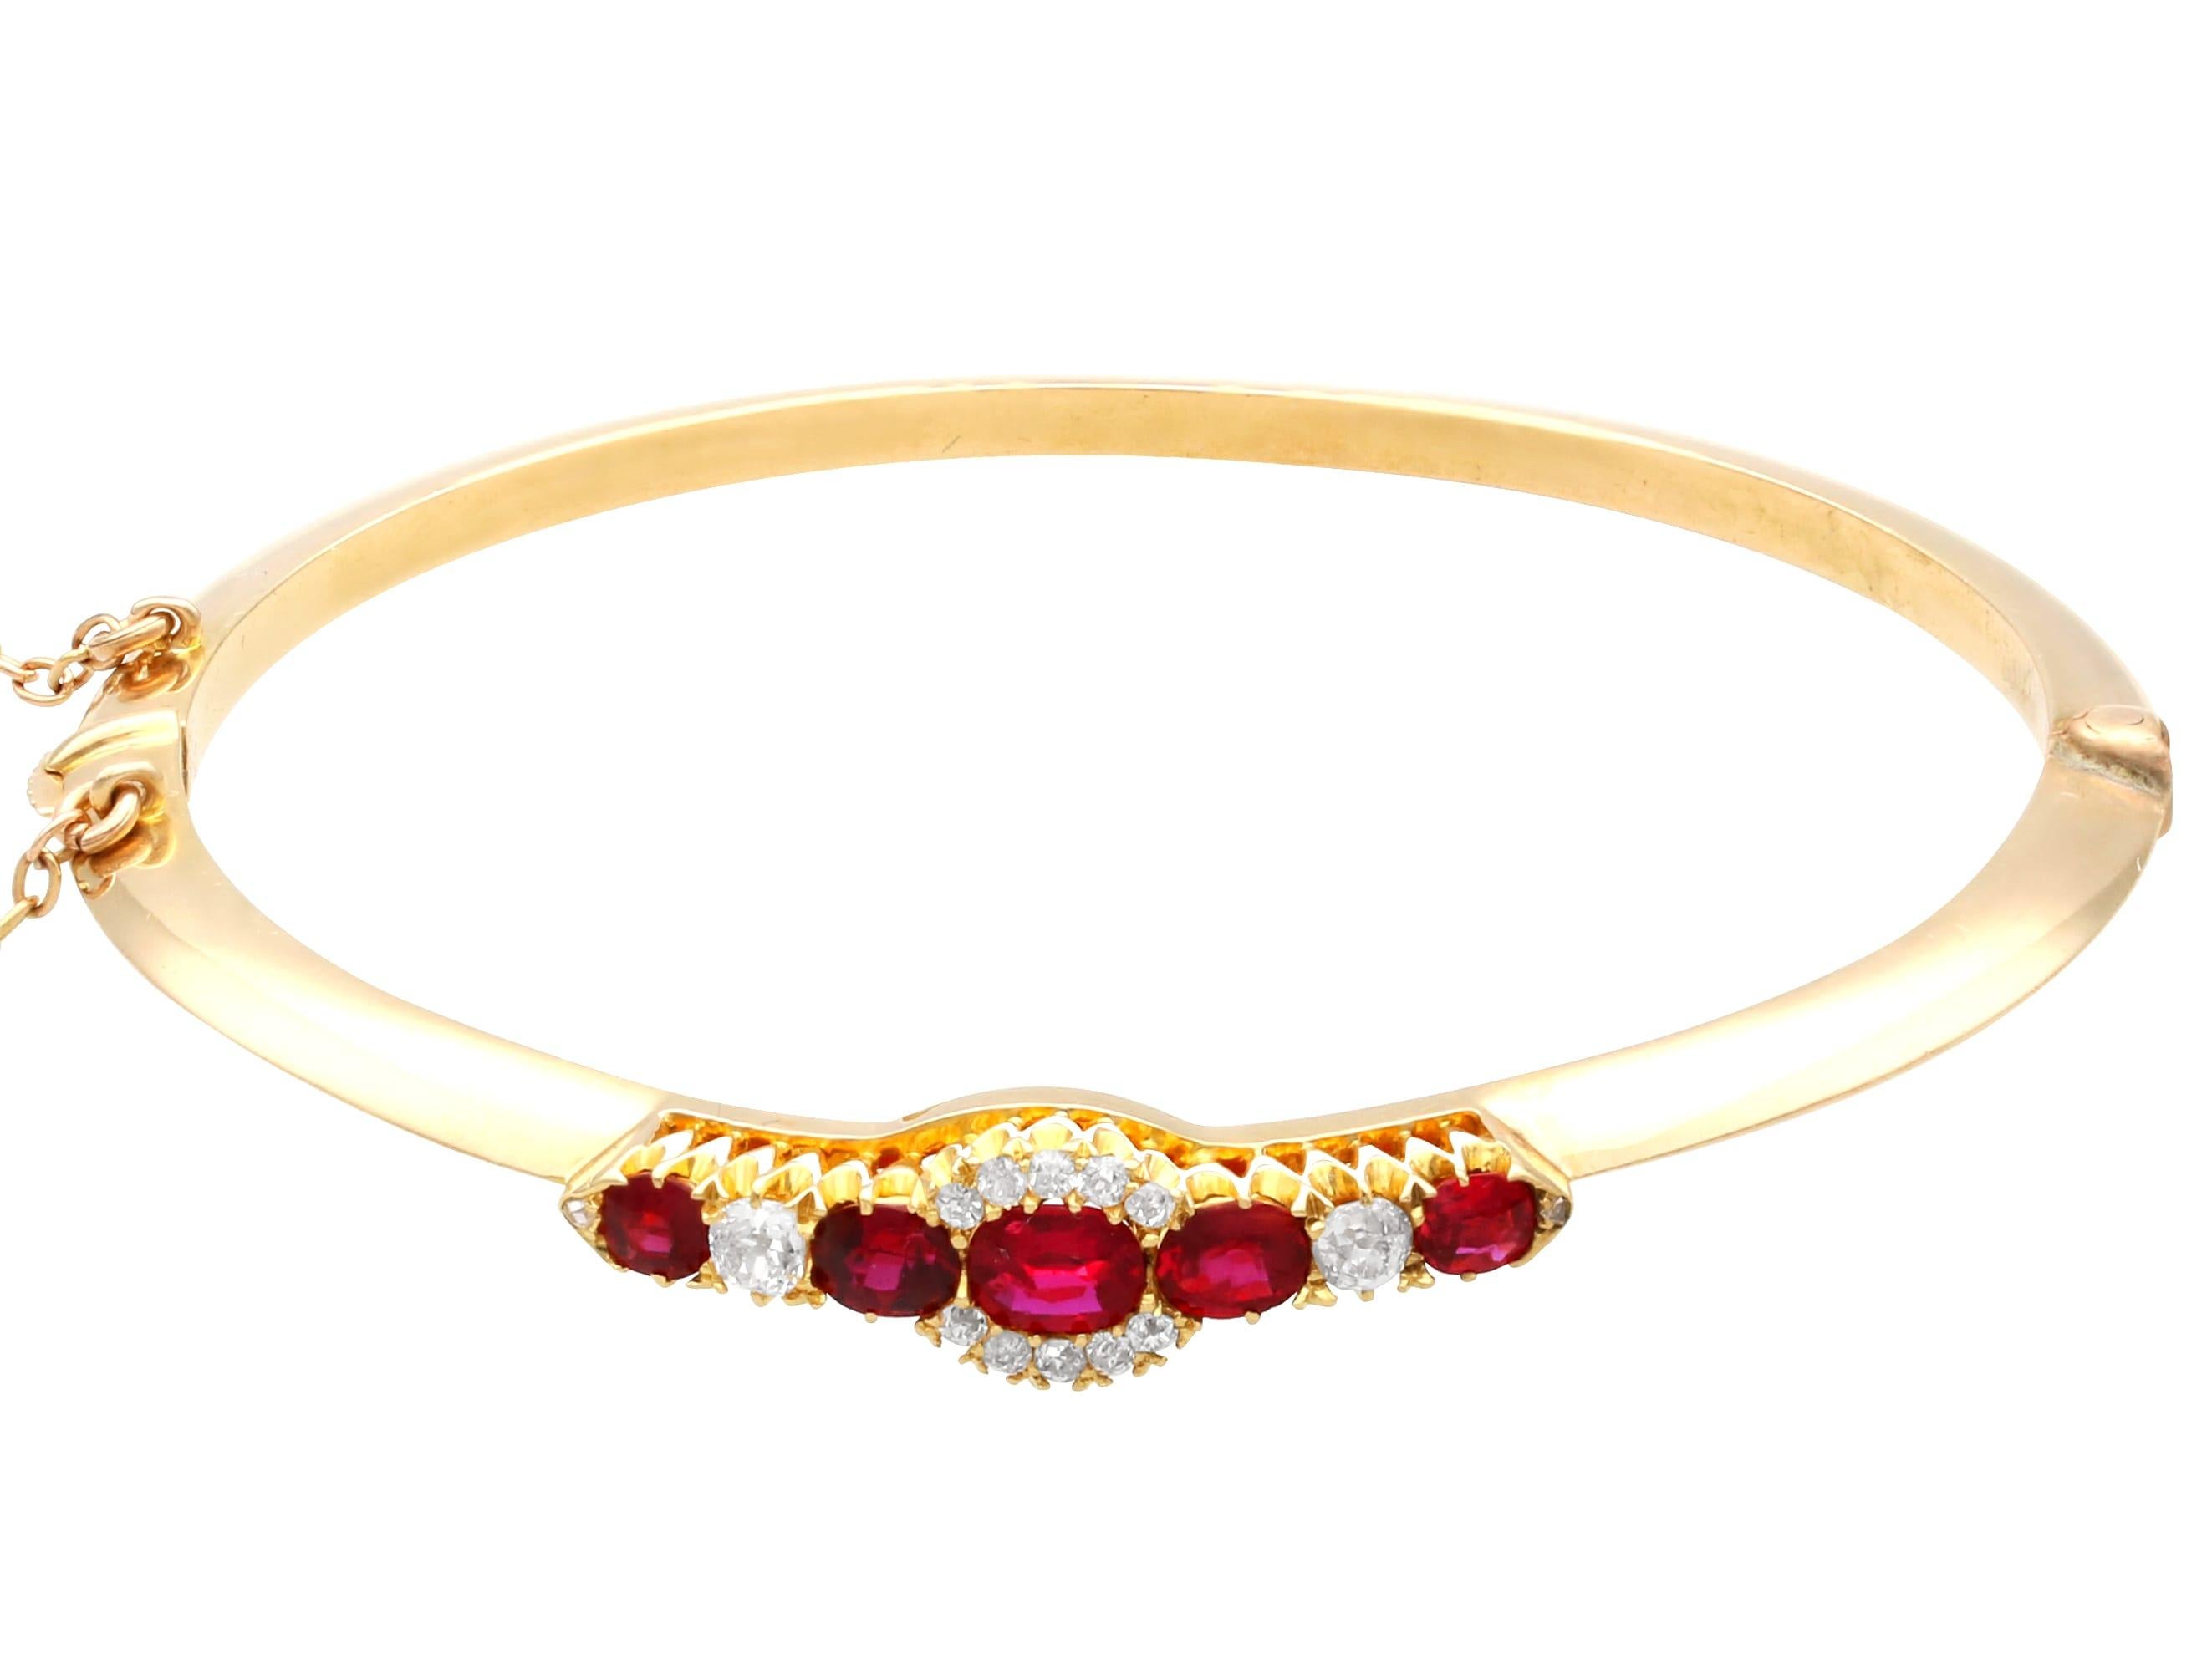 Oval Cut Victorian 1.95 Carat Ruby and 0.40 Carat Diamond 15k Yellow Gold Bangle For Sale